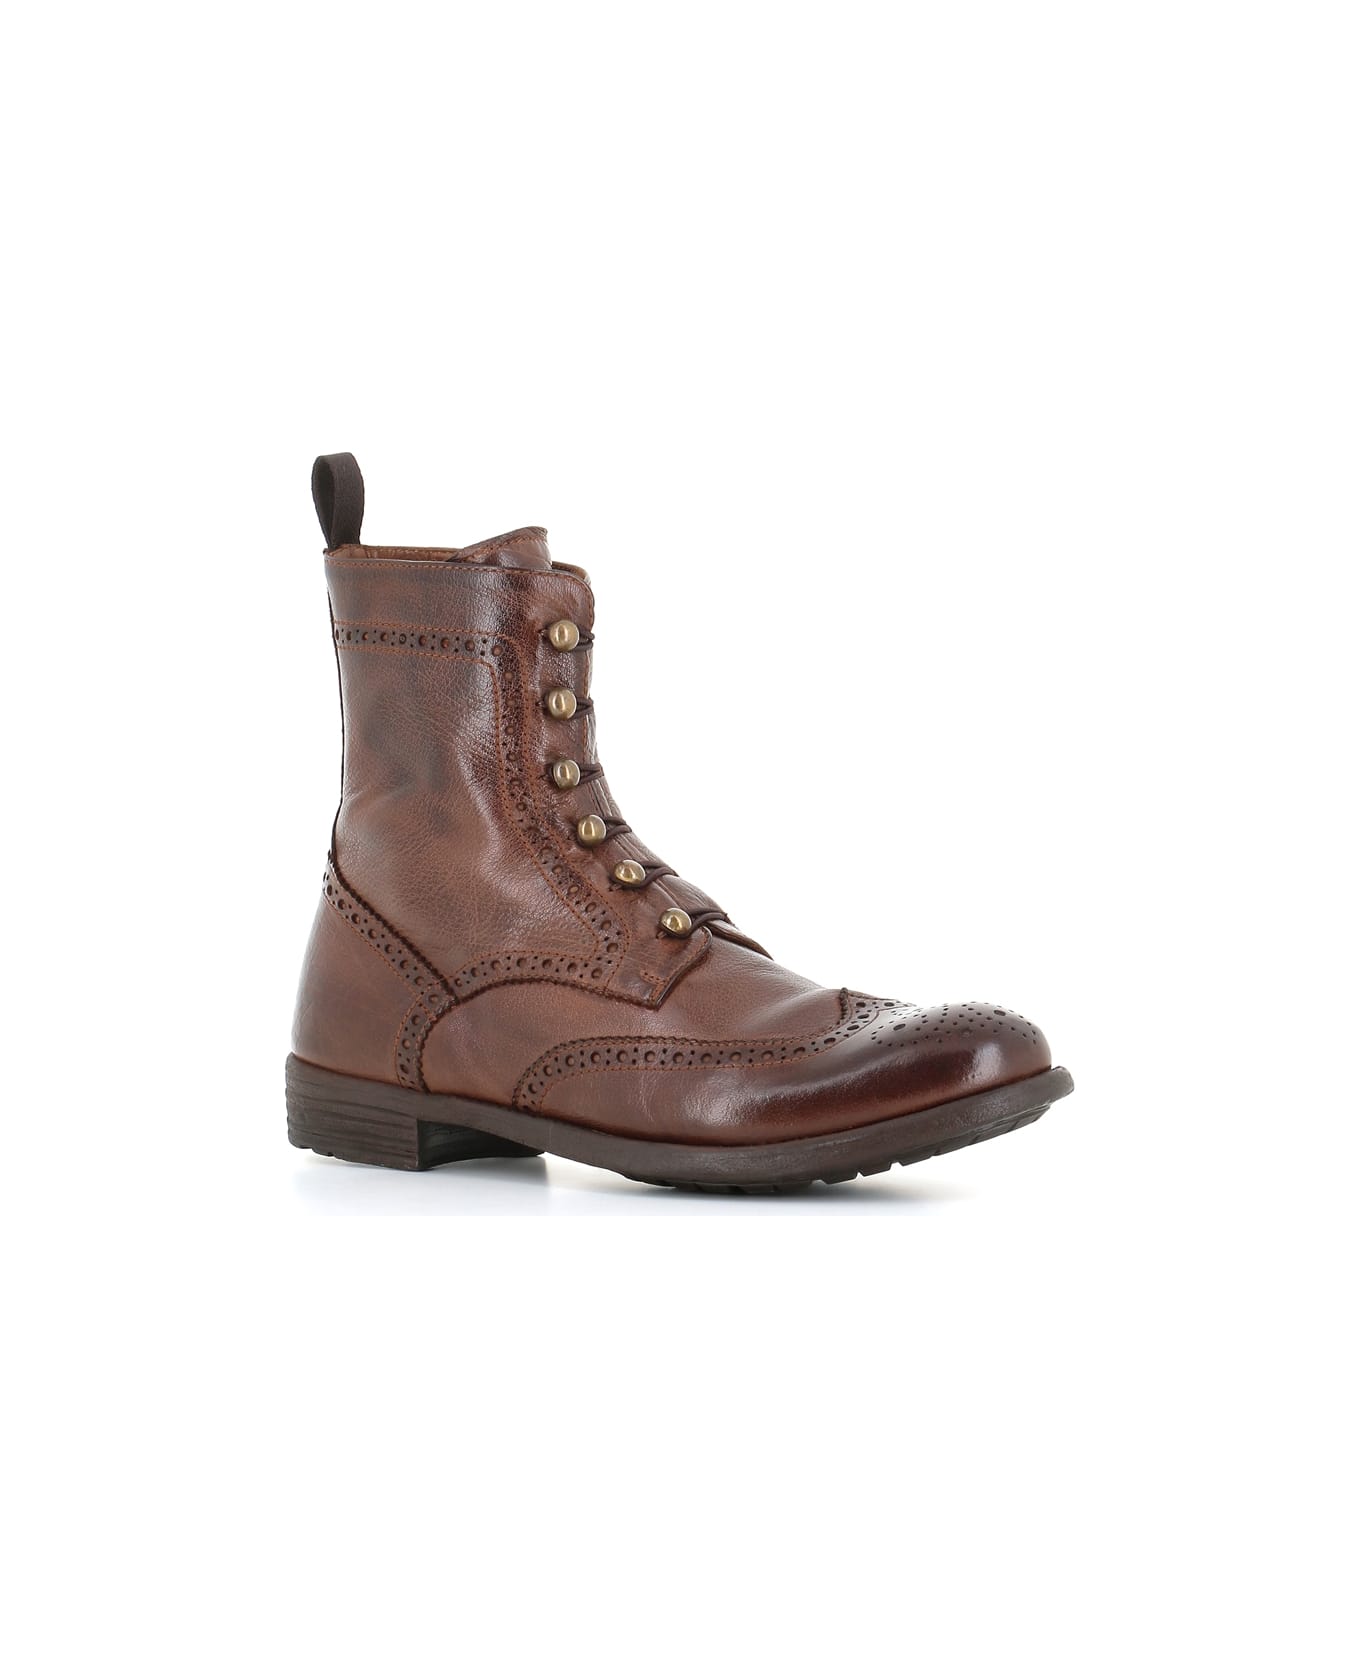 Officine Creative Lace-up Boot Mars/018 - Cognac ブーツ